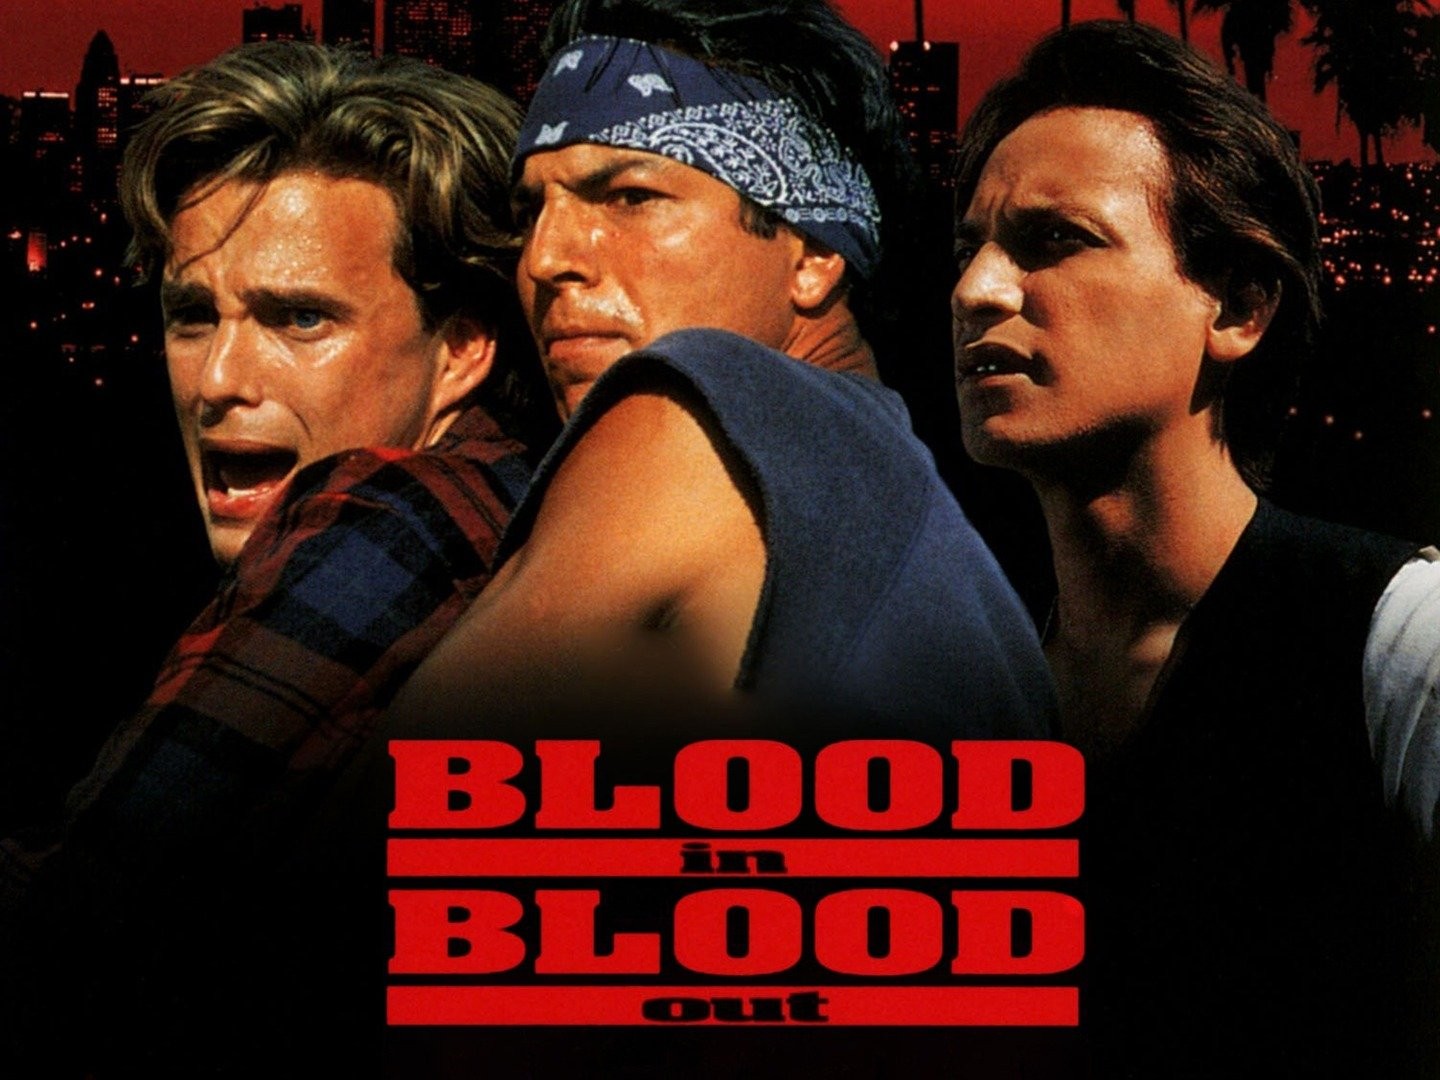 ashleigh glennon recommends Full Movie Blood In Blood Out